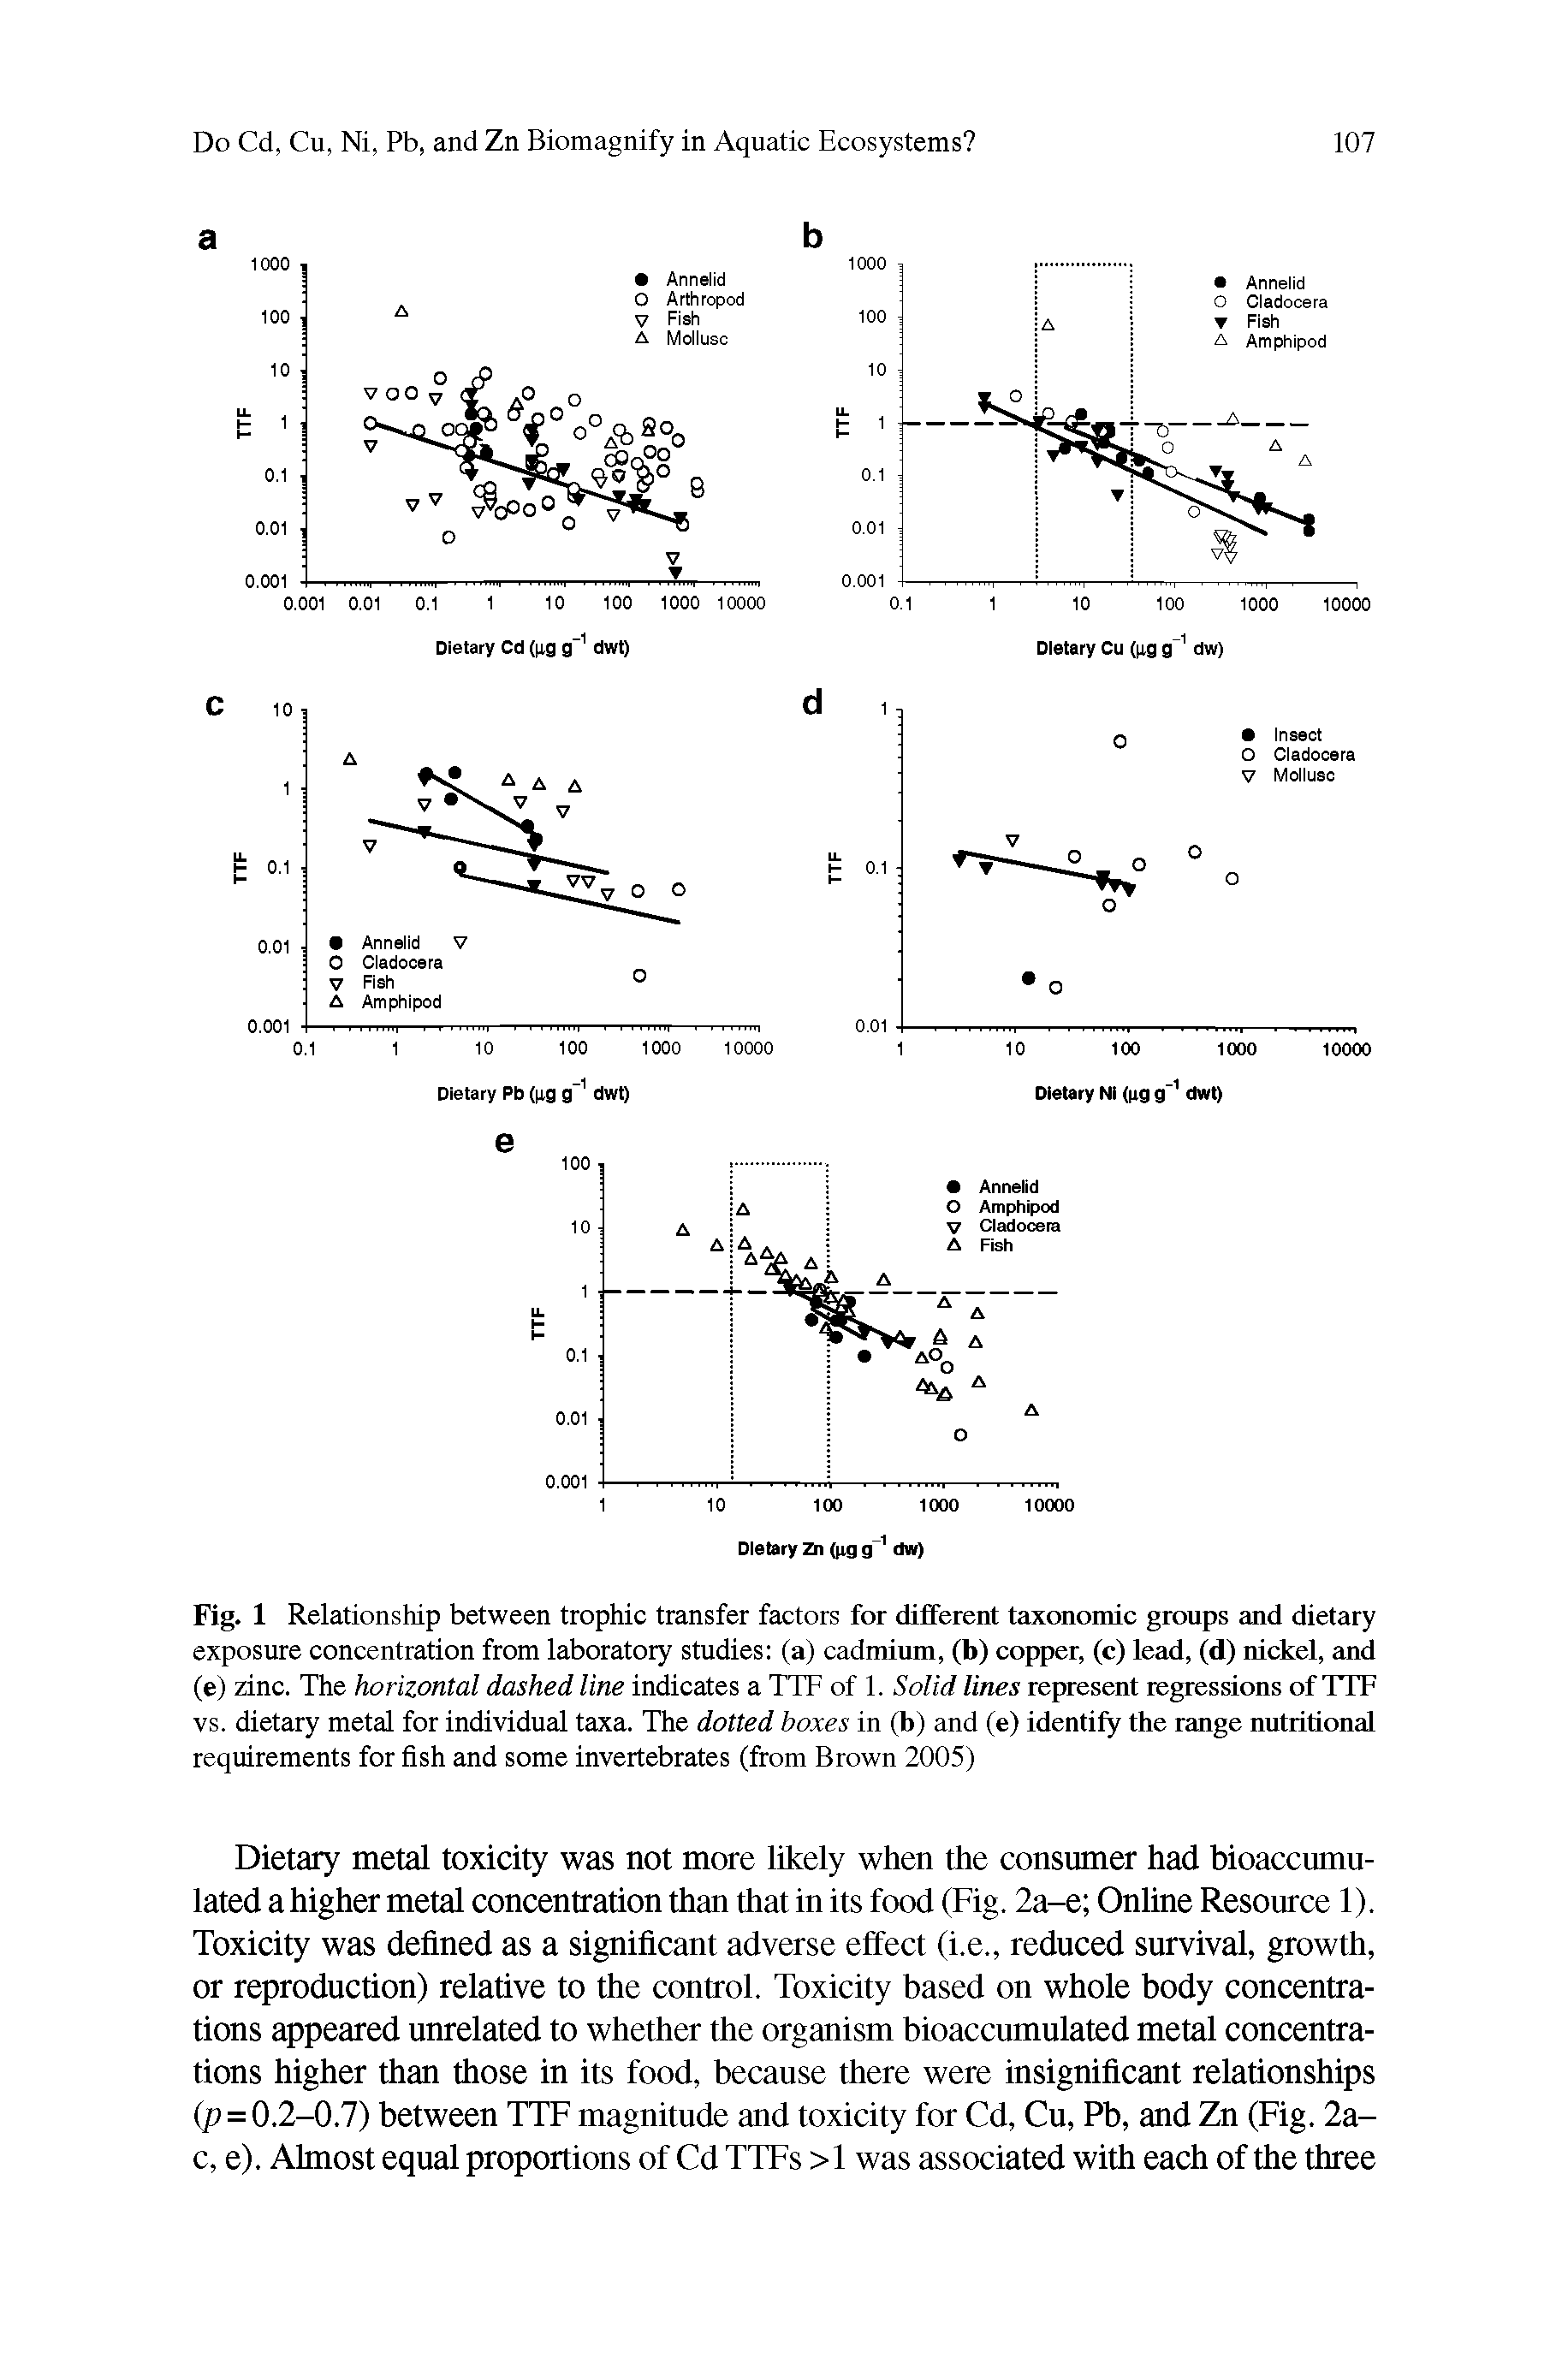 Fig. 1 Relationship between trophic transfer factors for different taxonomic groups and dietary exposure concentration from laboratory studies (a) cadmium, (b) copper, (c) lead, (d) nickel, and (e) zinc. The horizontal dashed line indicates a TTF of 1. Solid lines represent regressions of TTF vs. dietary metal for individual taxa. The dotted boxes in (b) and (e) identify the range nutritional requirements for fish and some invertebrates (from Brown 2005)...